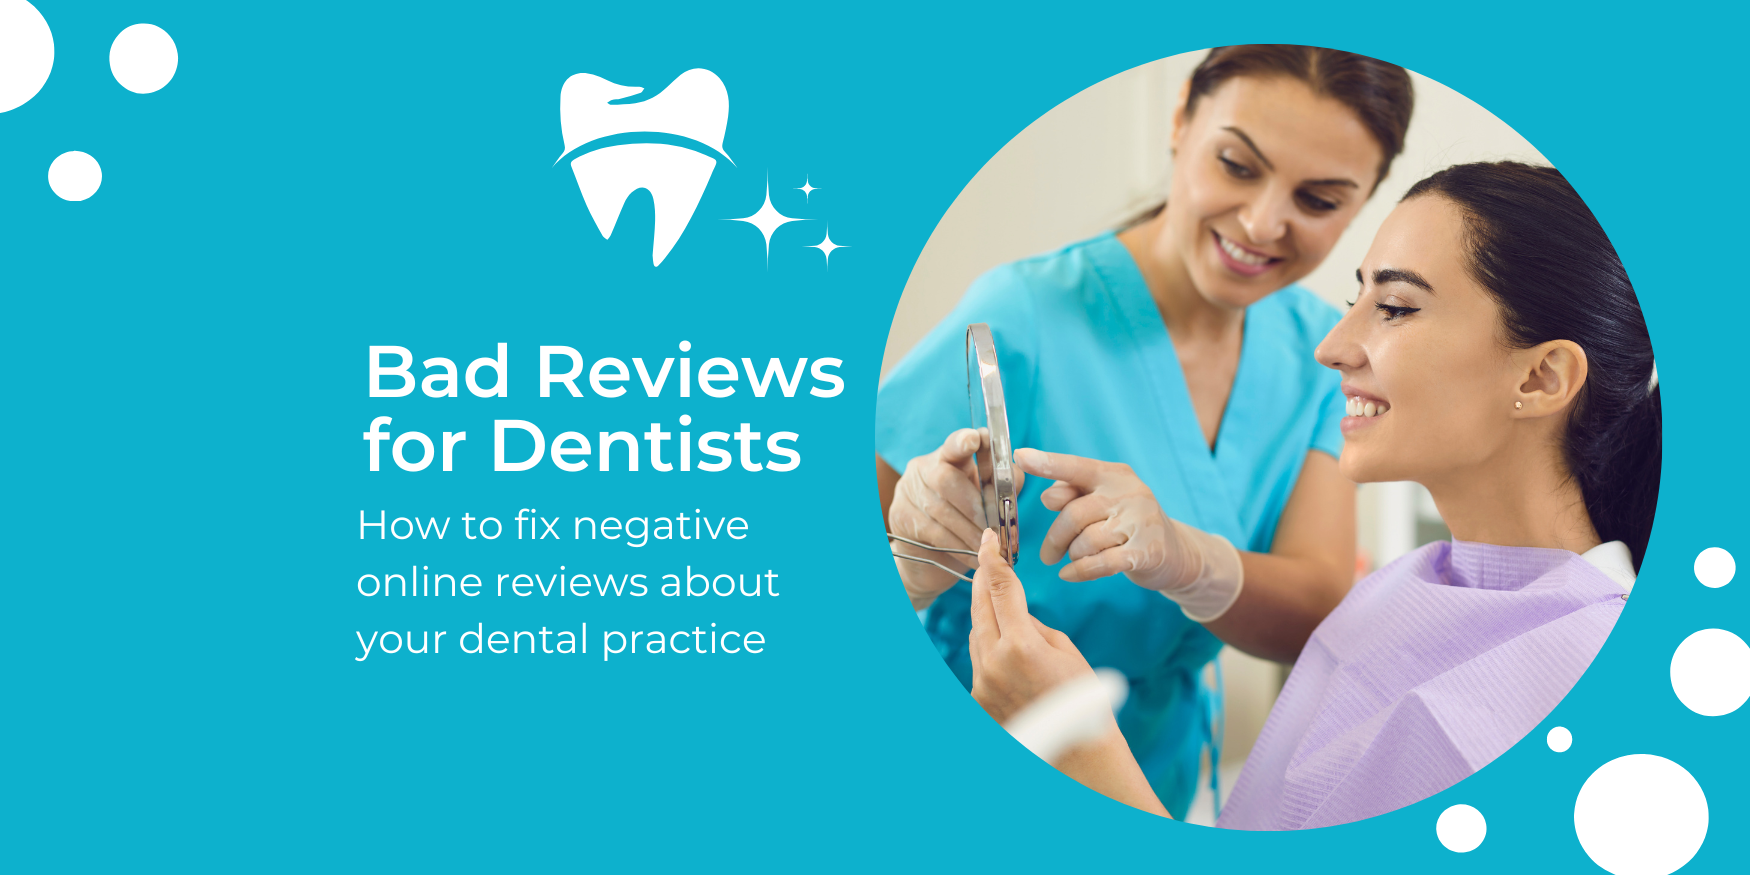 Bad Reviews for dentists (1)